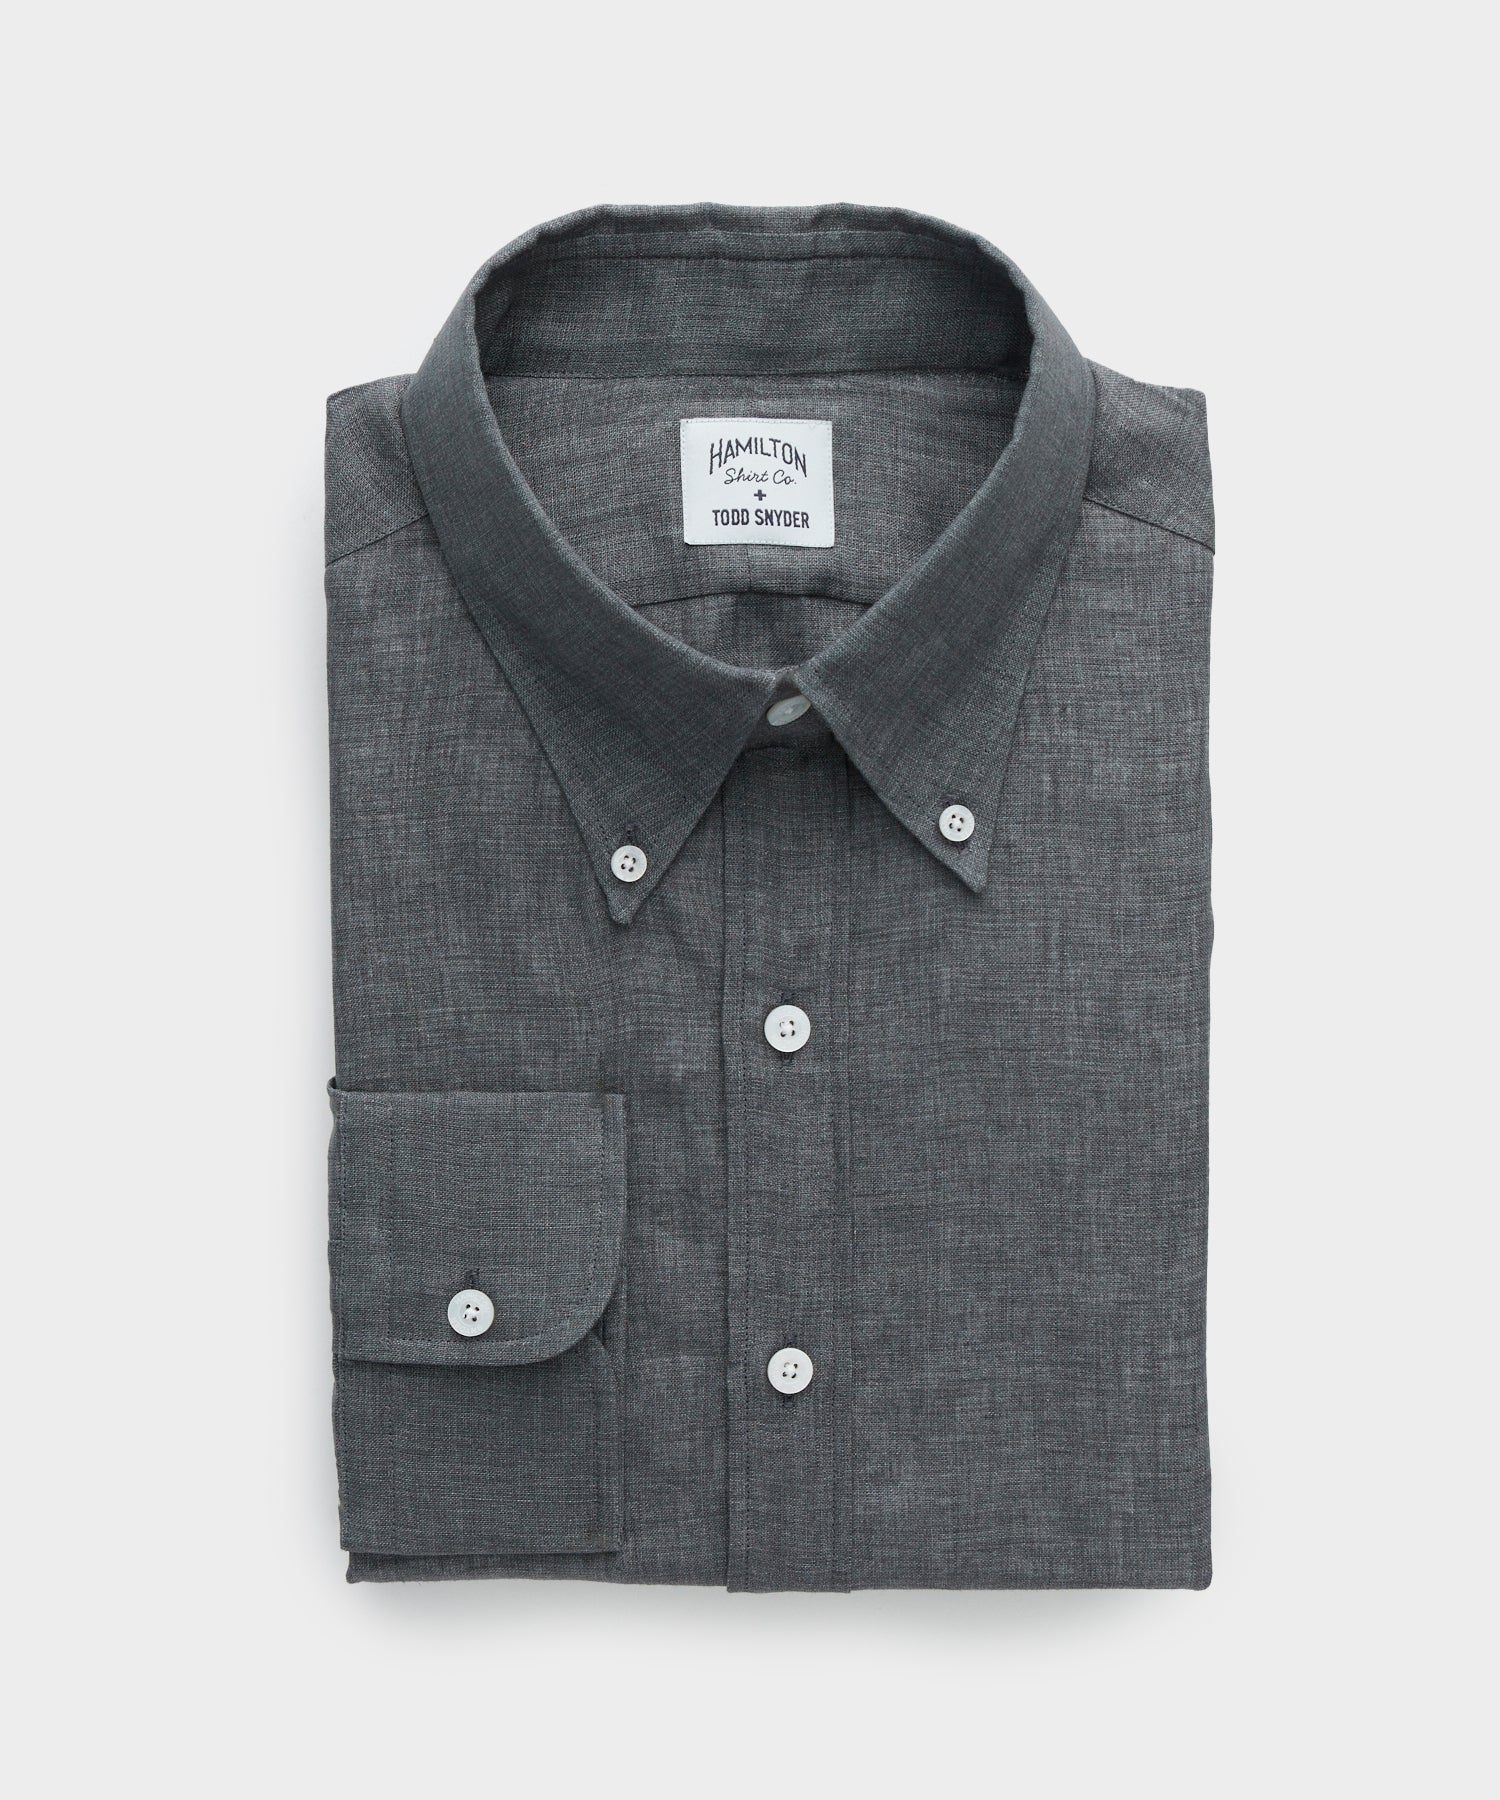 Todd Snyder X Hamilton Linen Dress Shirt In Charcoal